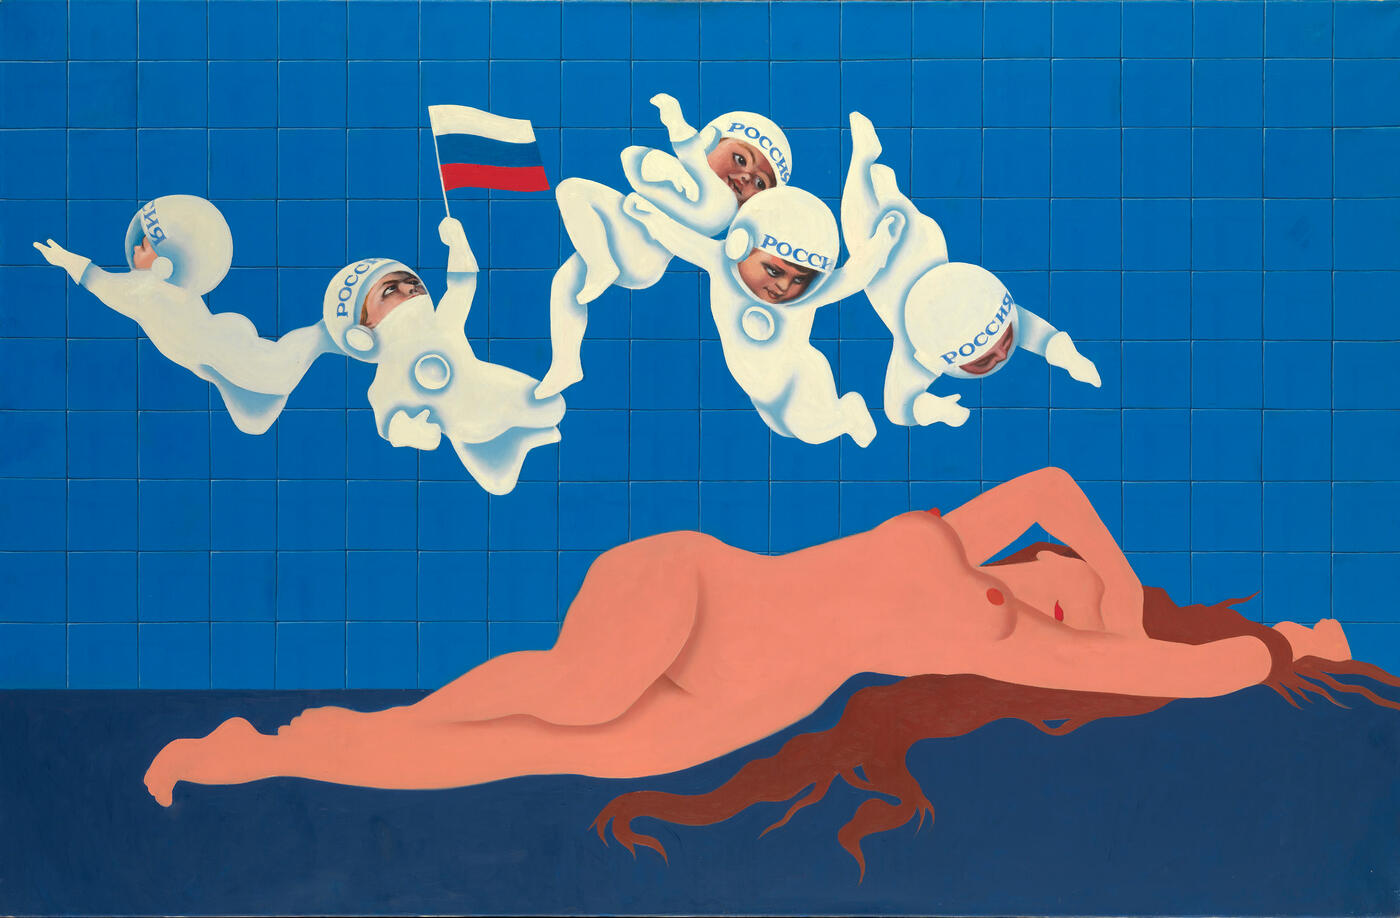 Reclining Venus with Cosmonaut Putti, from the series "Russian Venus"